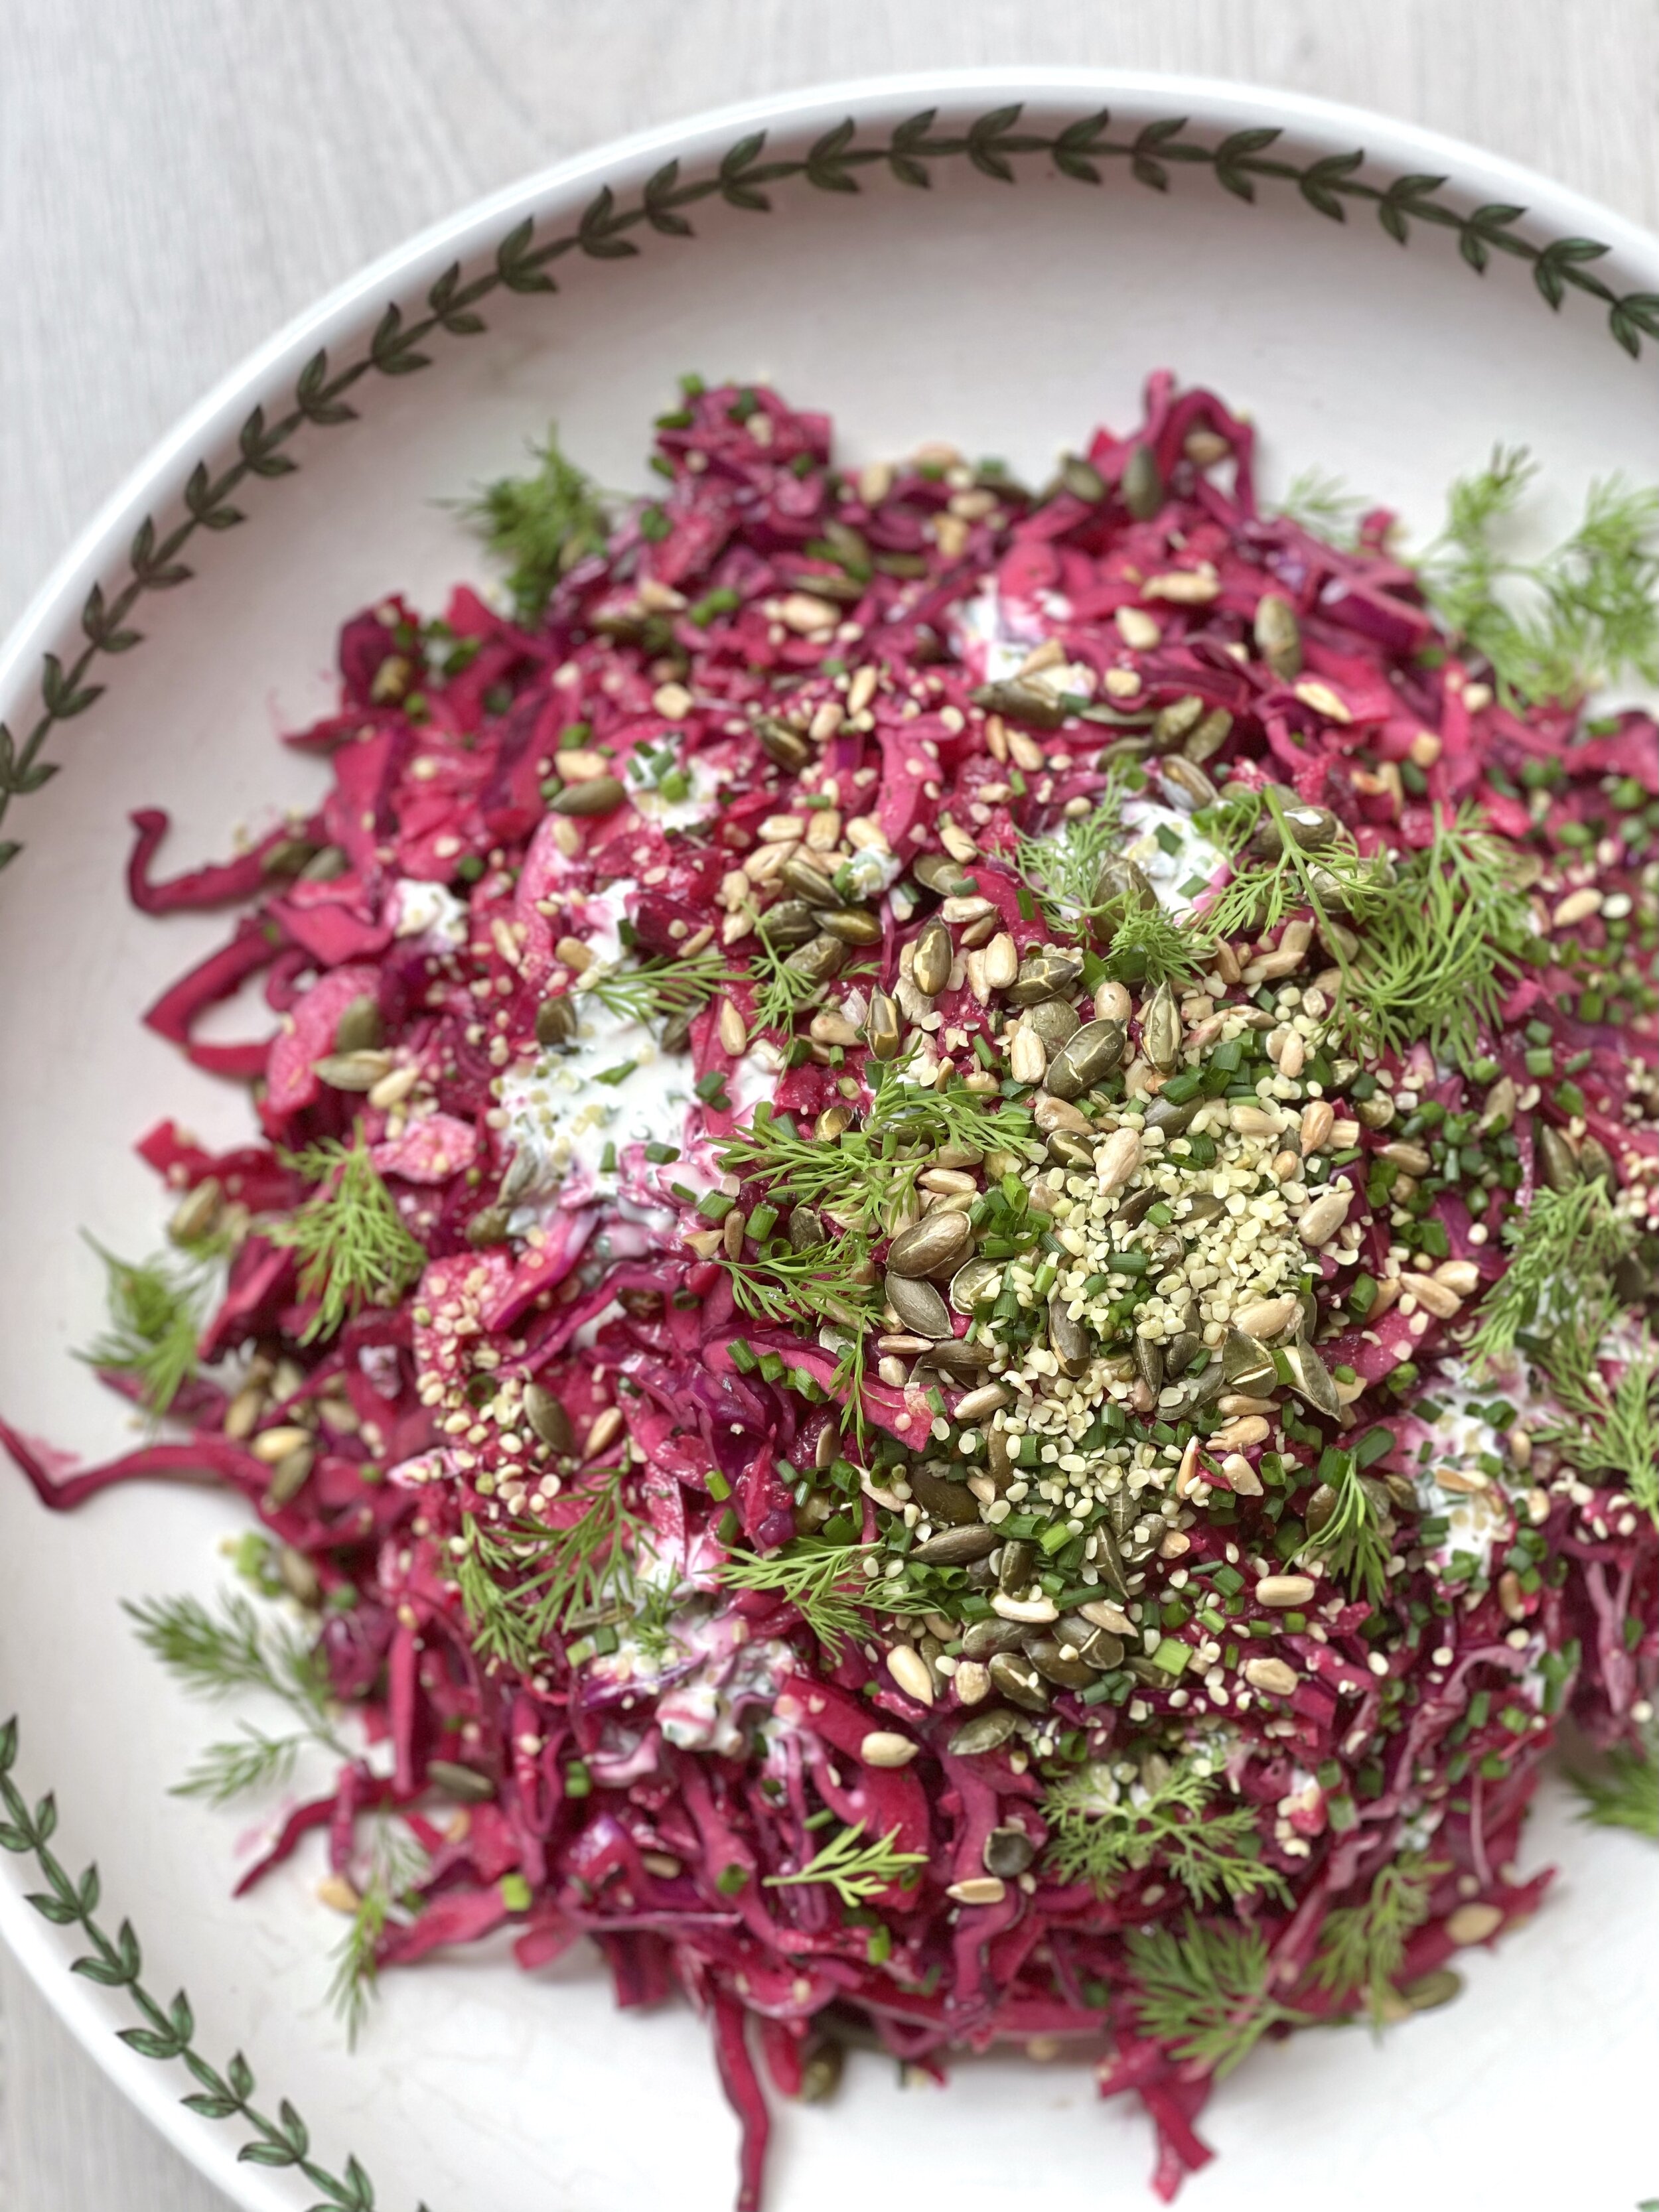 Pink slaw, by Joey and Katy cook